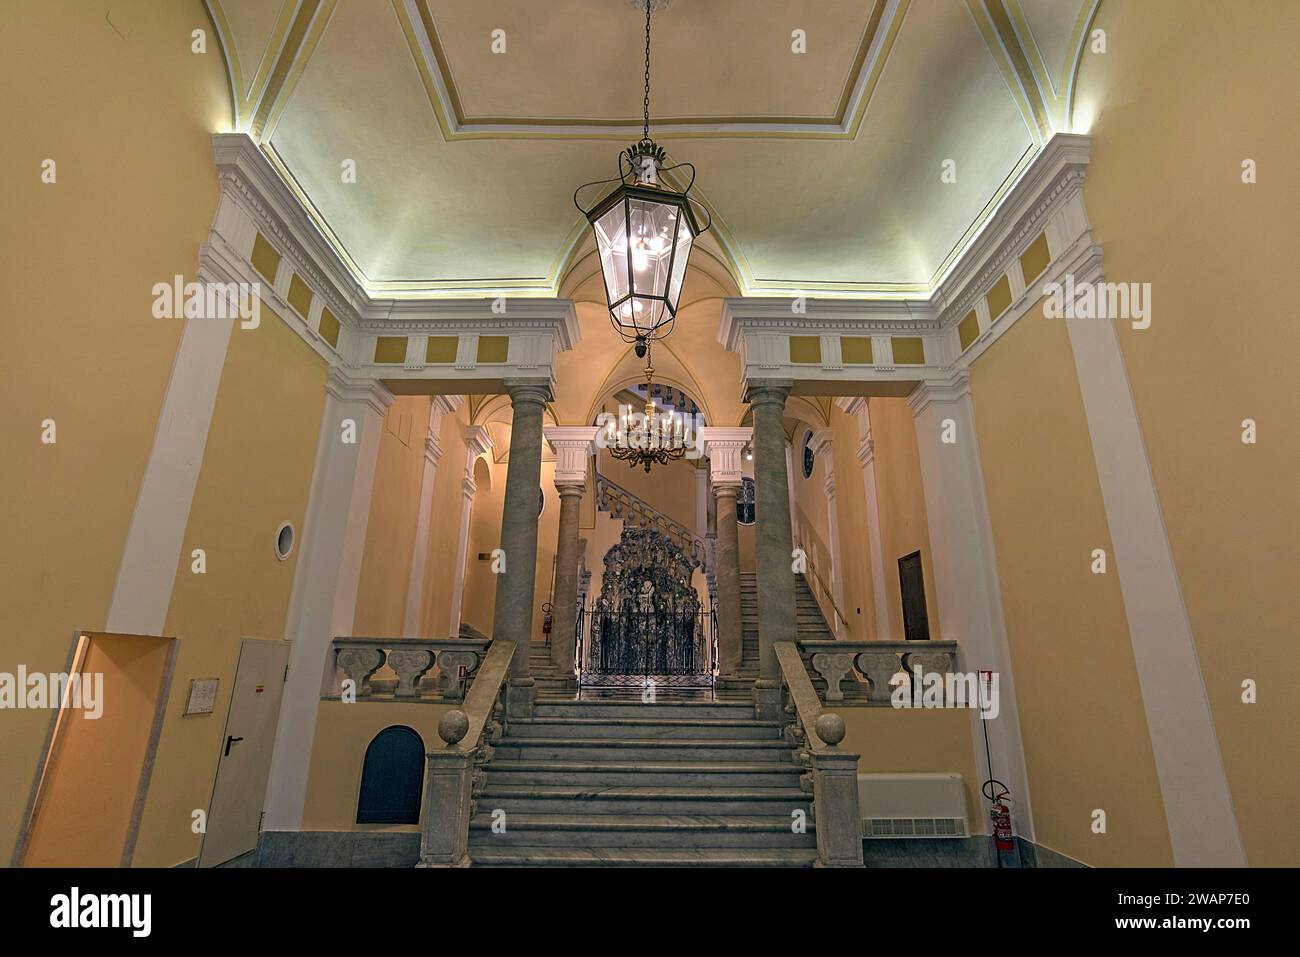 View into the entrance hall of a former palace, today Banca Profilo, Genoa, Italy, Europe Stock Photo